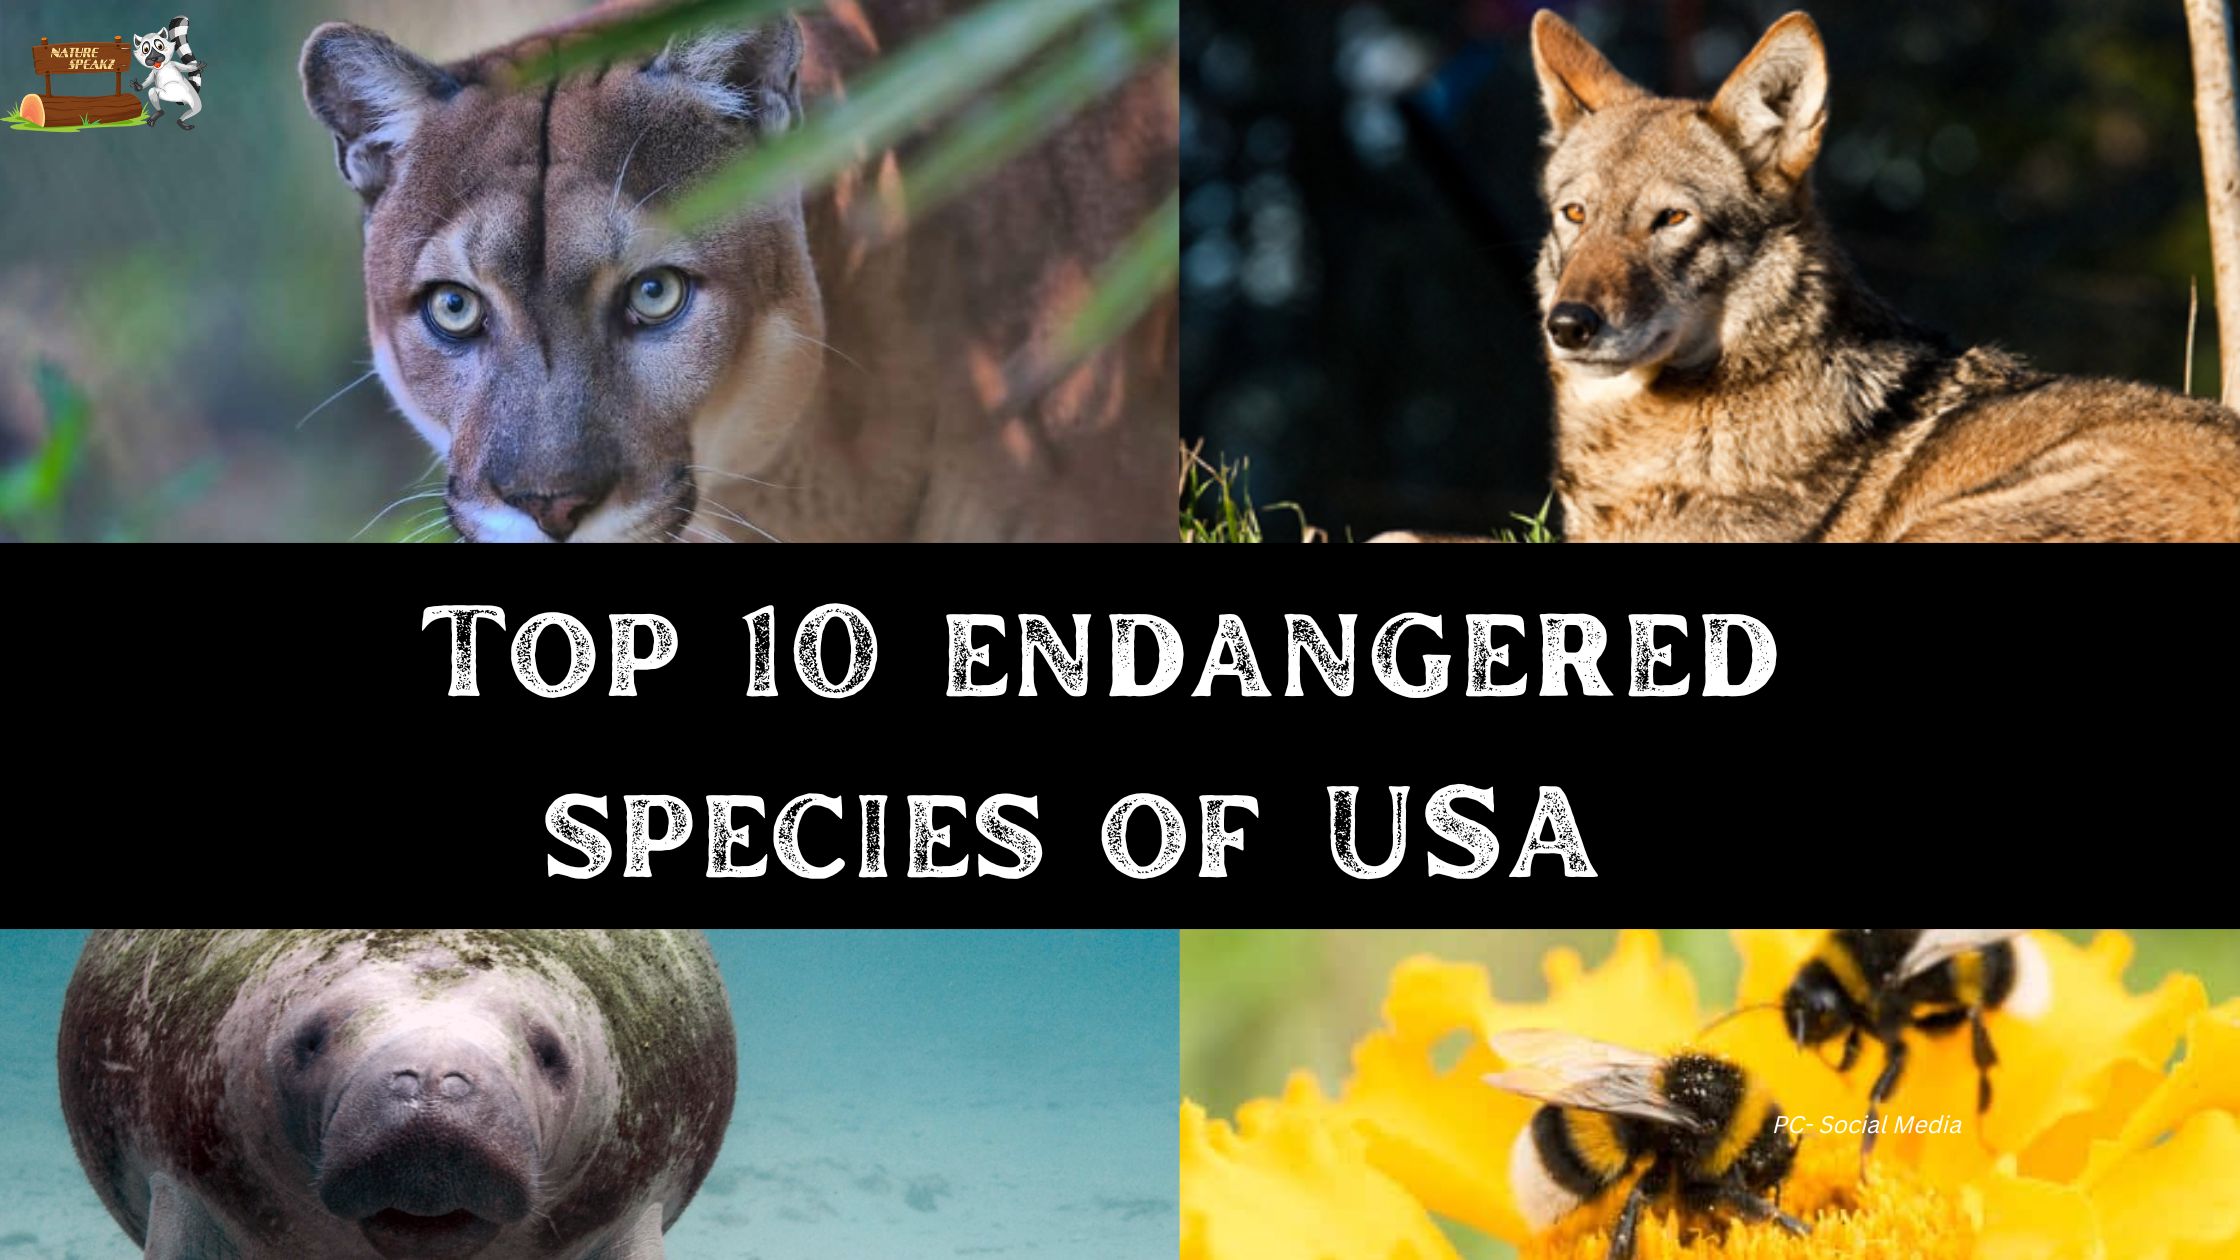 Top 10 endangered species of USA